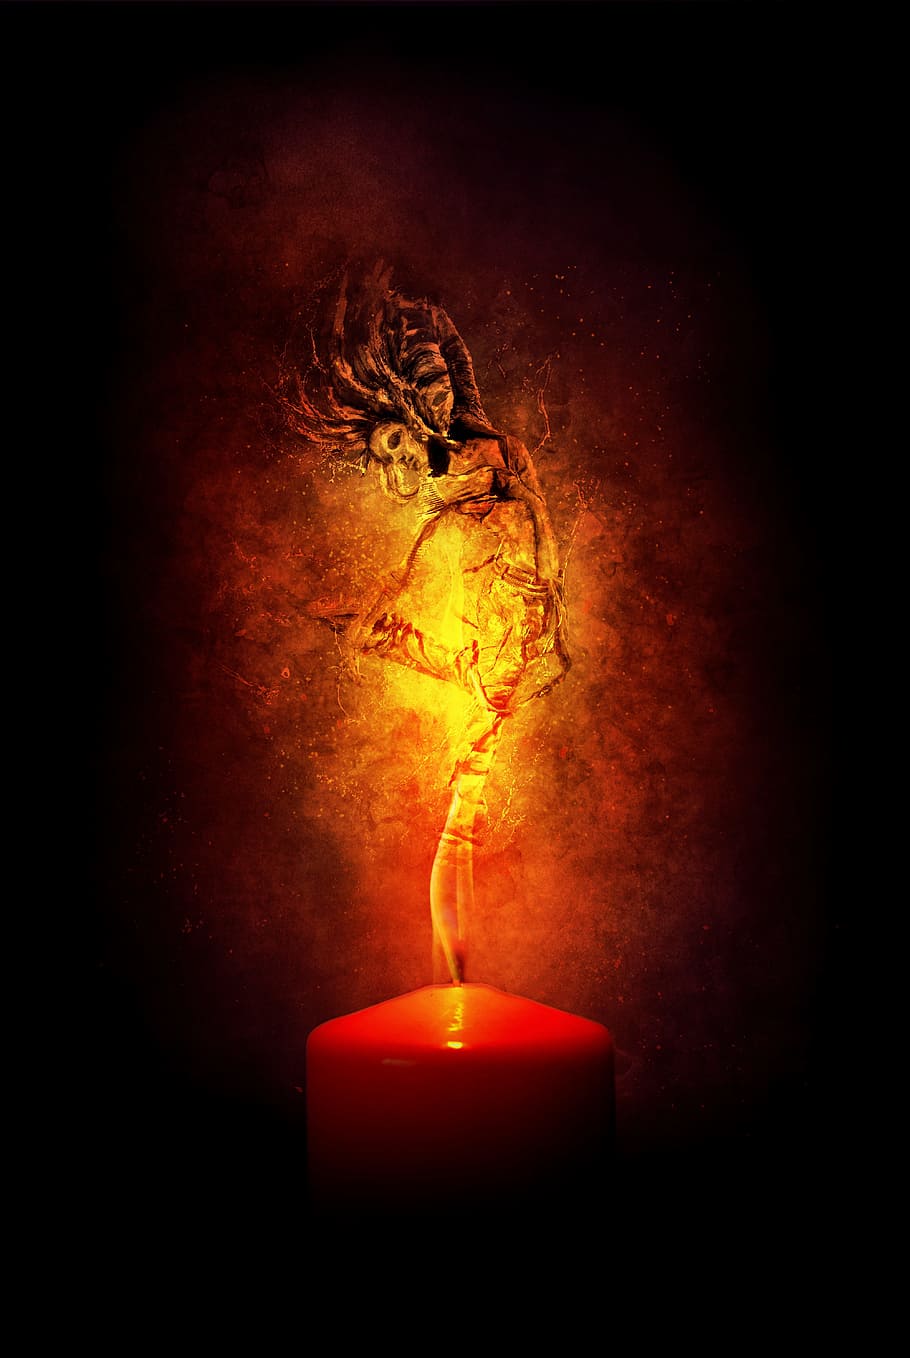 dancing woman wallpaper, flames, fire, woman, inflamed, light, candle, fantasy, magic, ignite